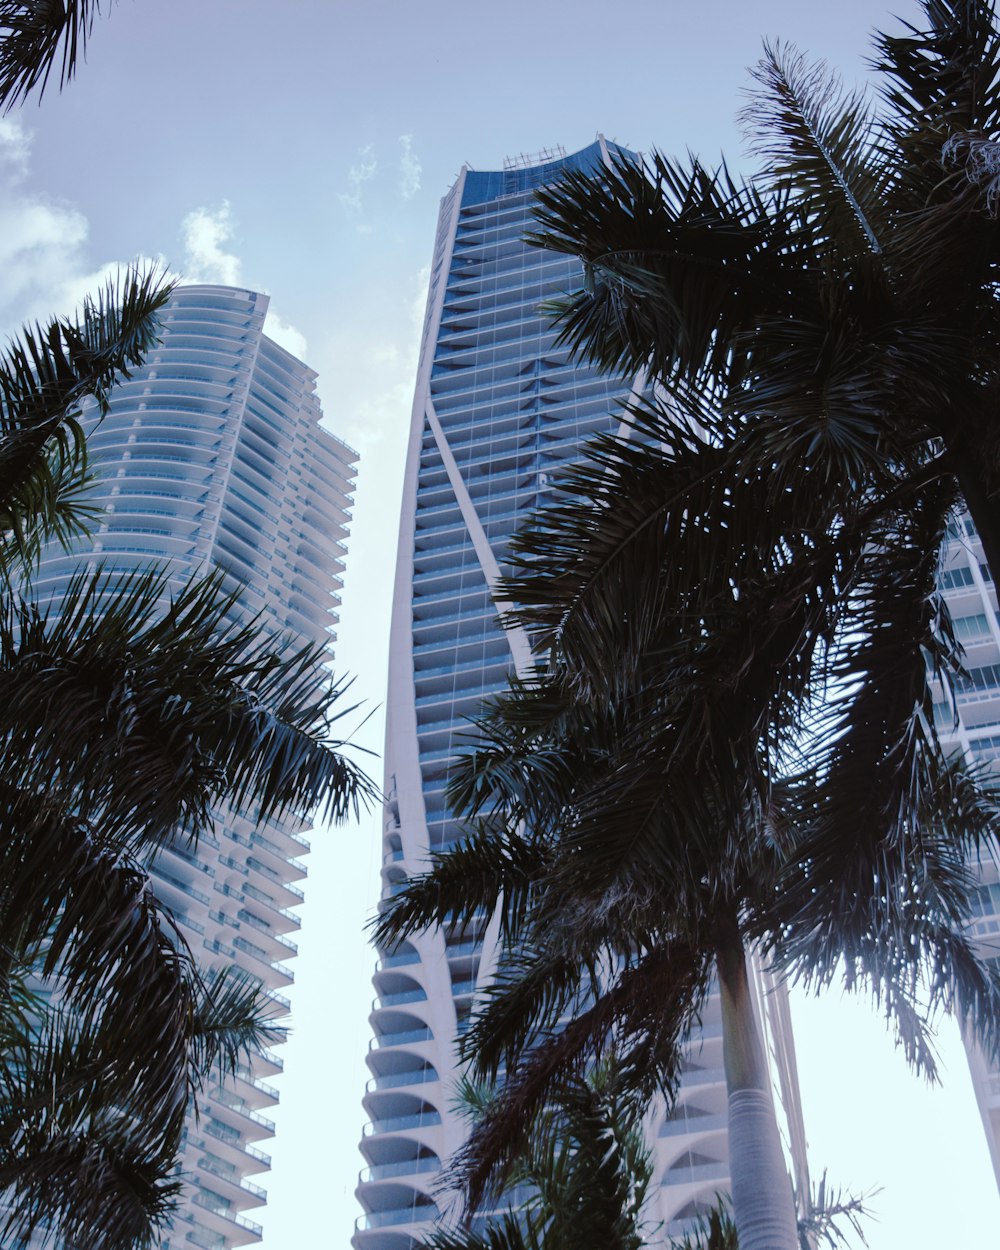 low-angle photography of white and blue high-rise buildings near coconut trees under white and blue sky